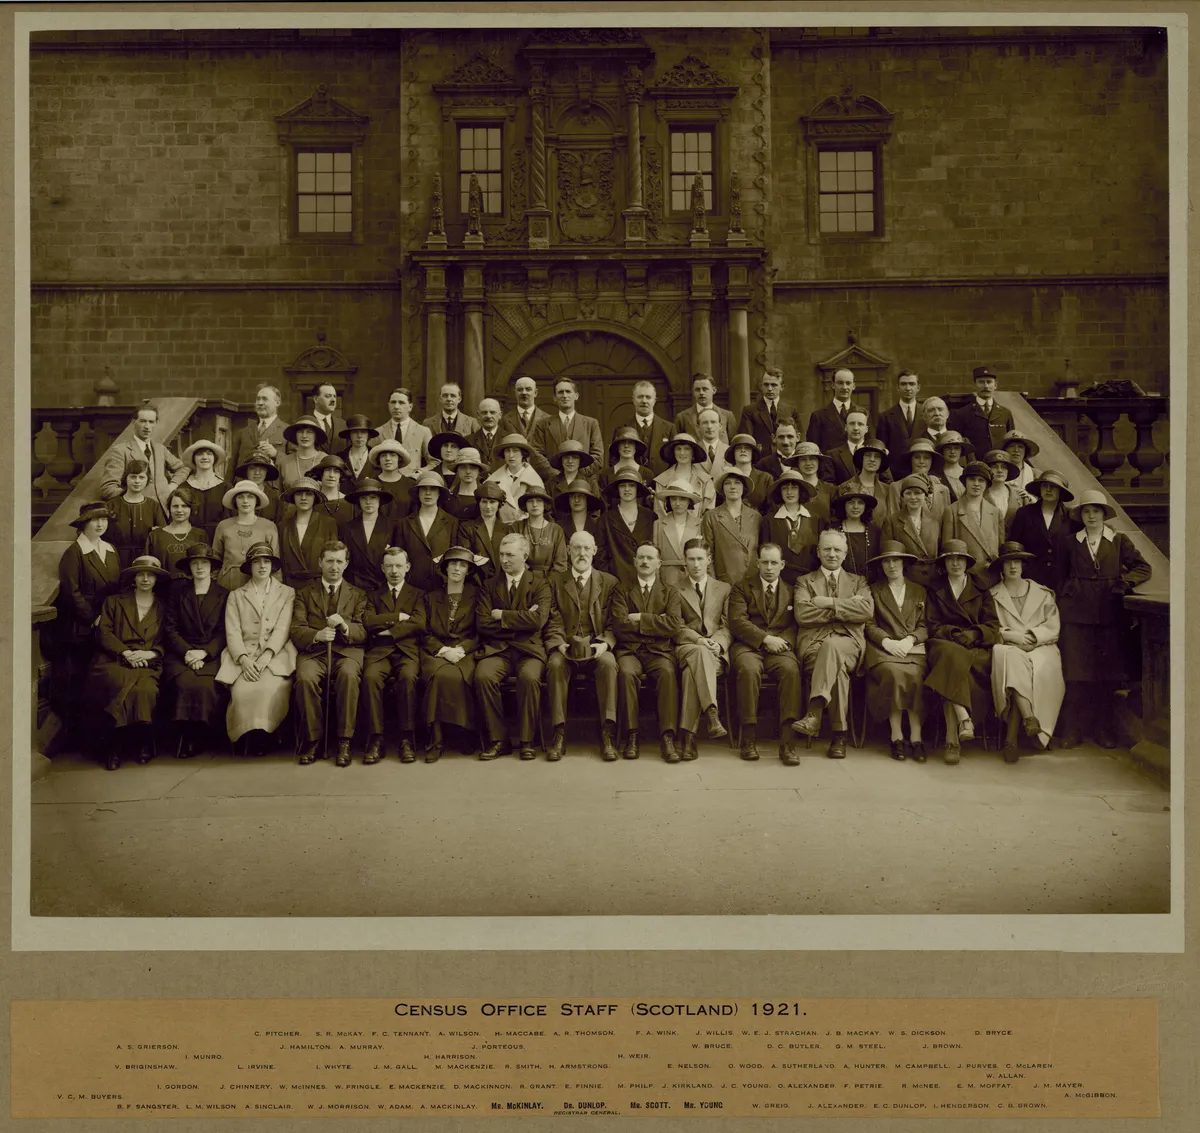  The 1921 census Scotland office staff outside George Heriot's School in Edinburgh